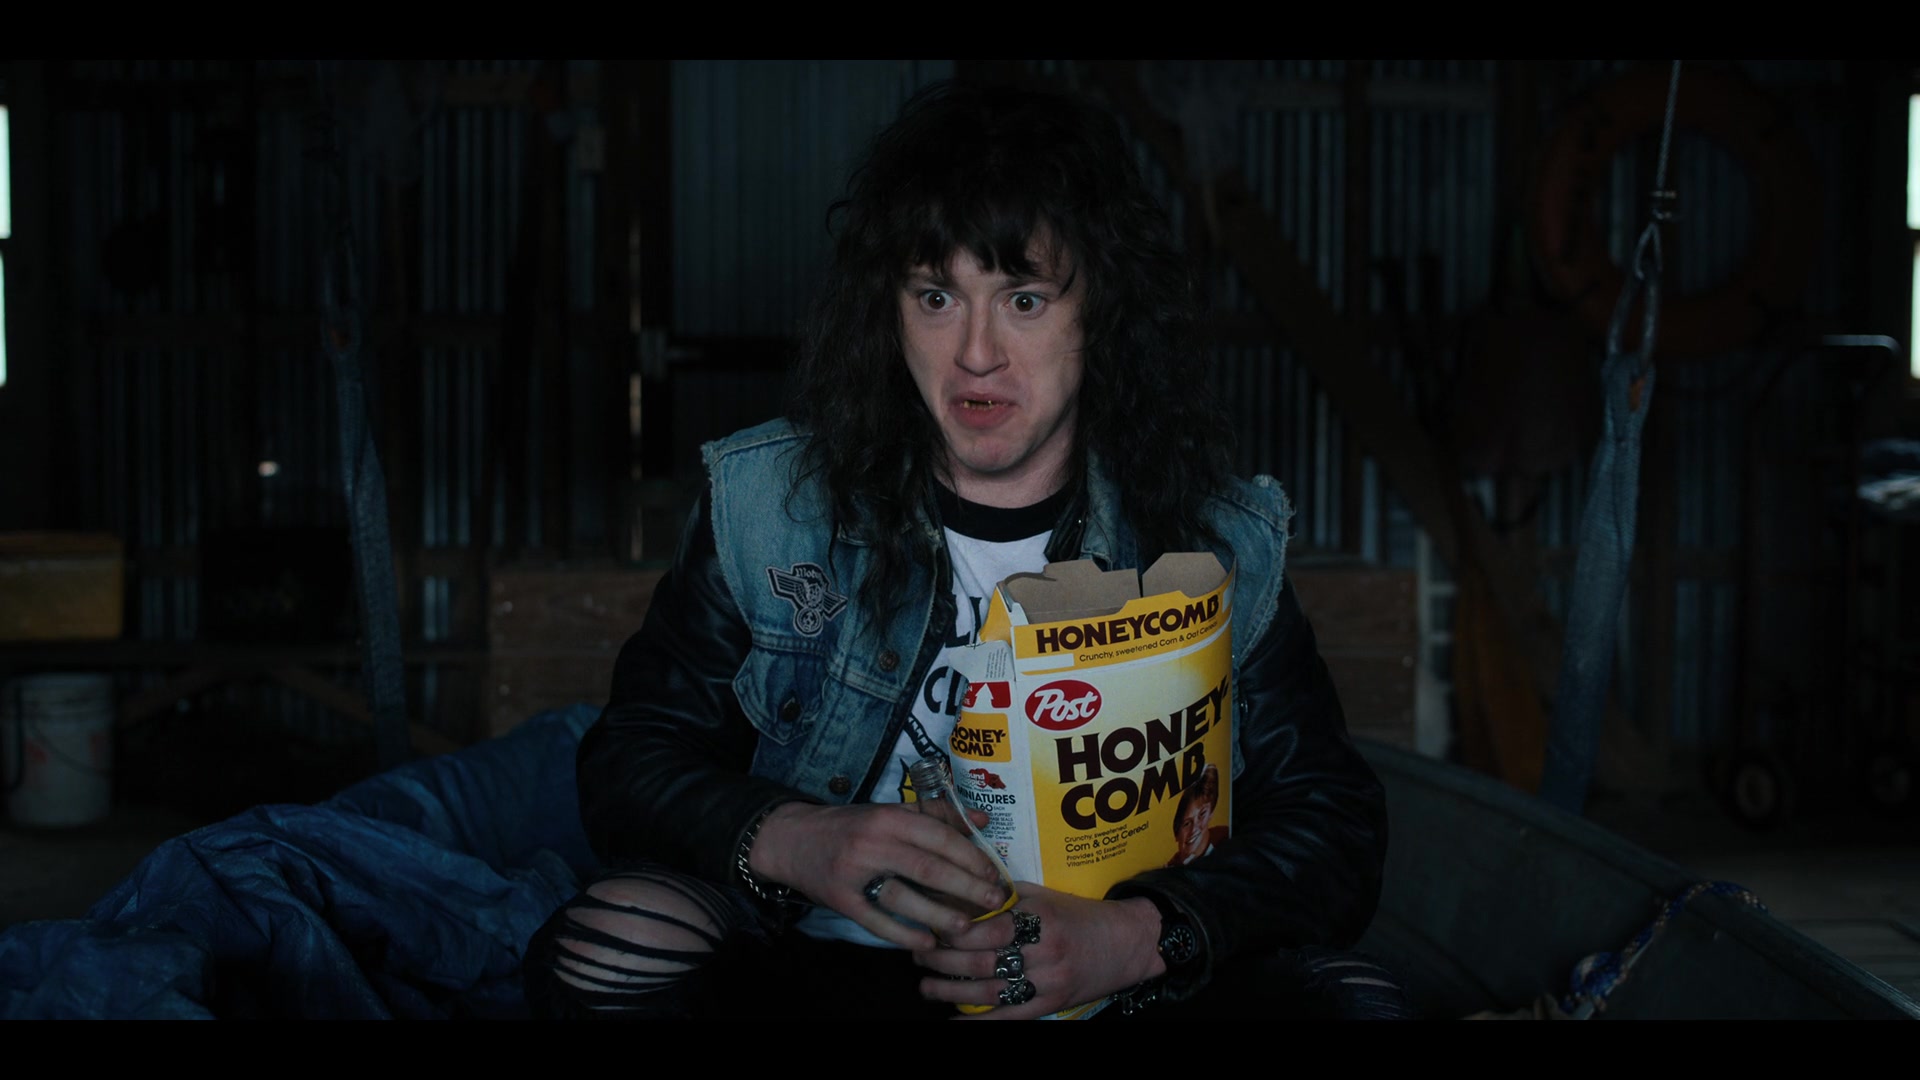 Post Honeycomb Cereal Enjoyed By Joseph Quinn As Eddie Munson In Stranger Things S04E03 Chapter Three: The Monster And The Superhero (2022)